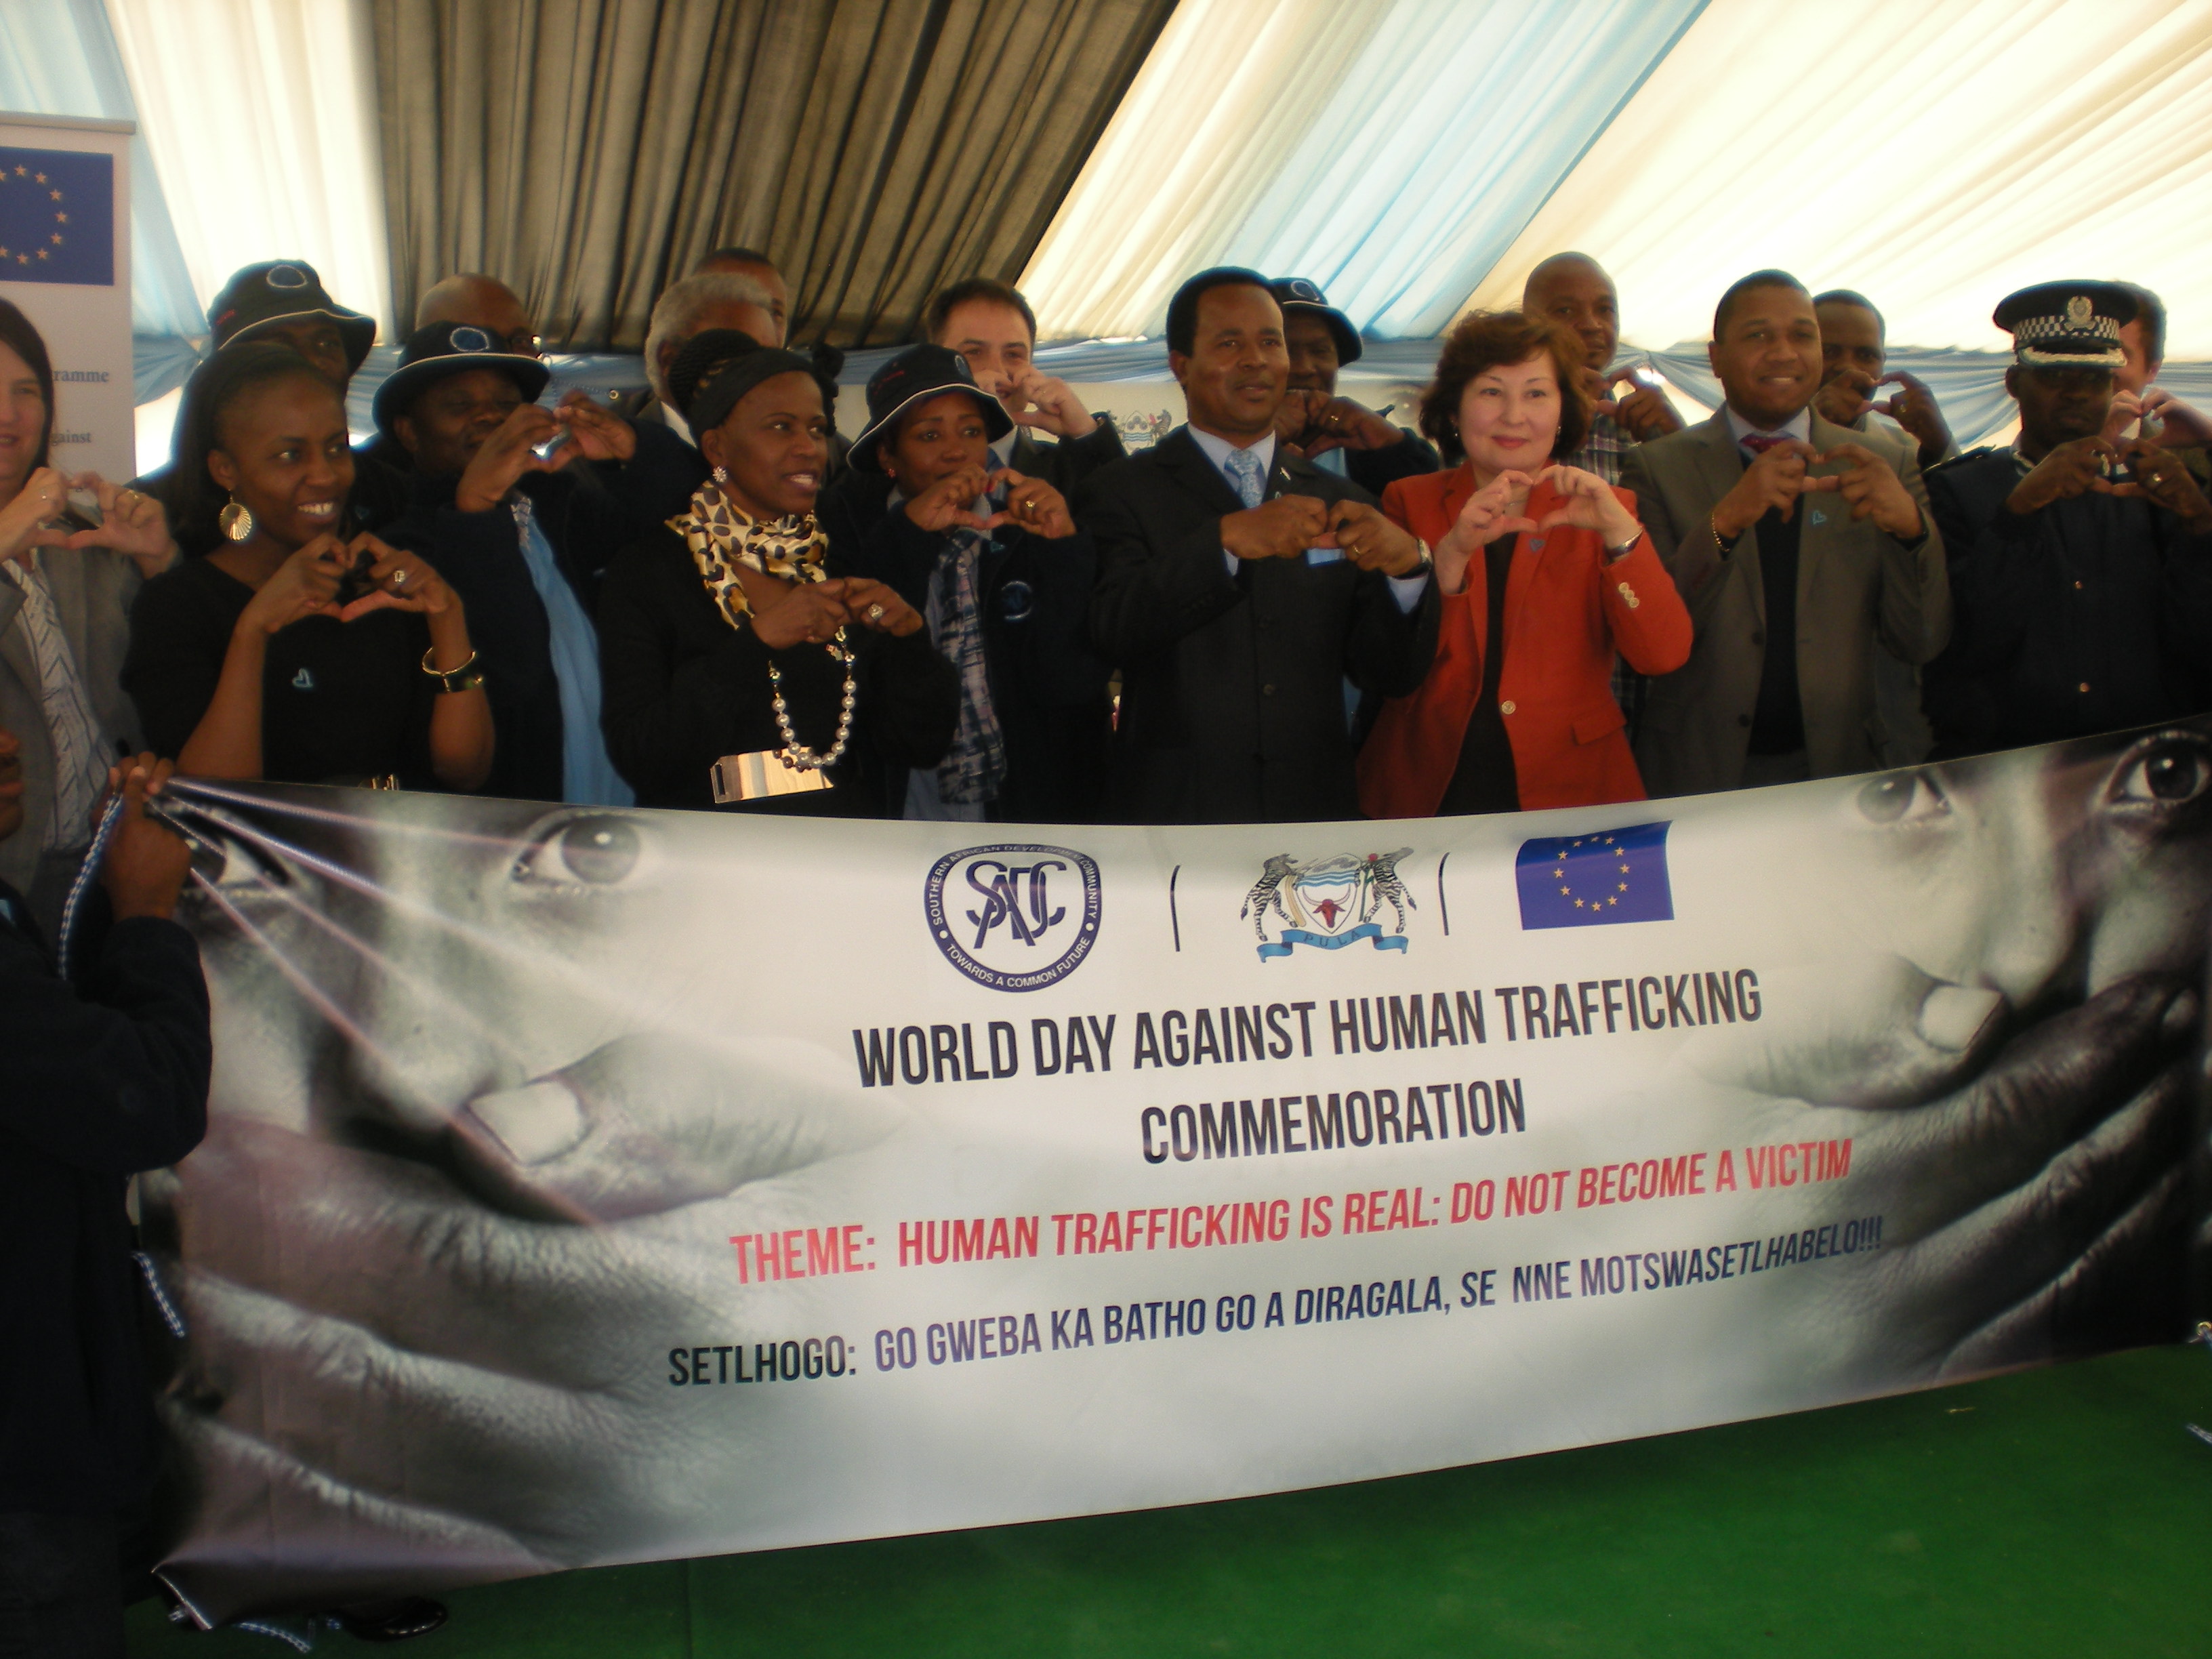 Commemoration of International Day Against Trafficking in Persons, Botswane (Picture: UNODC)